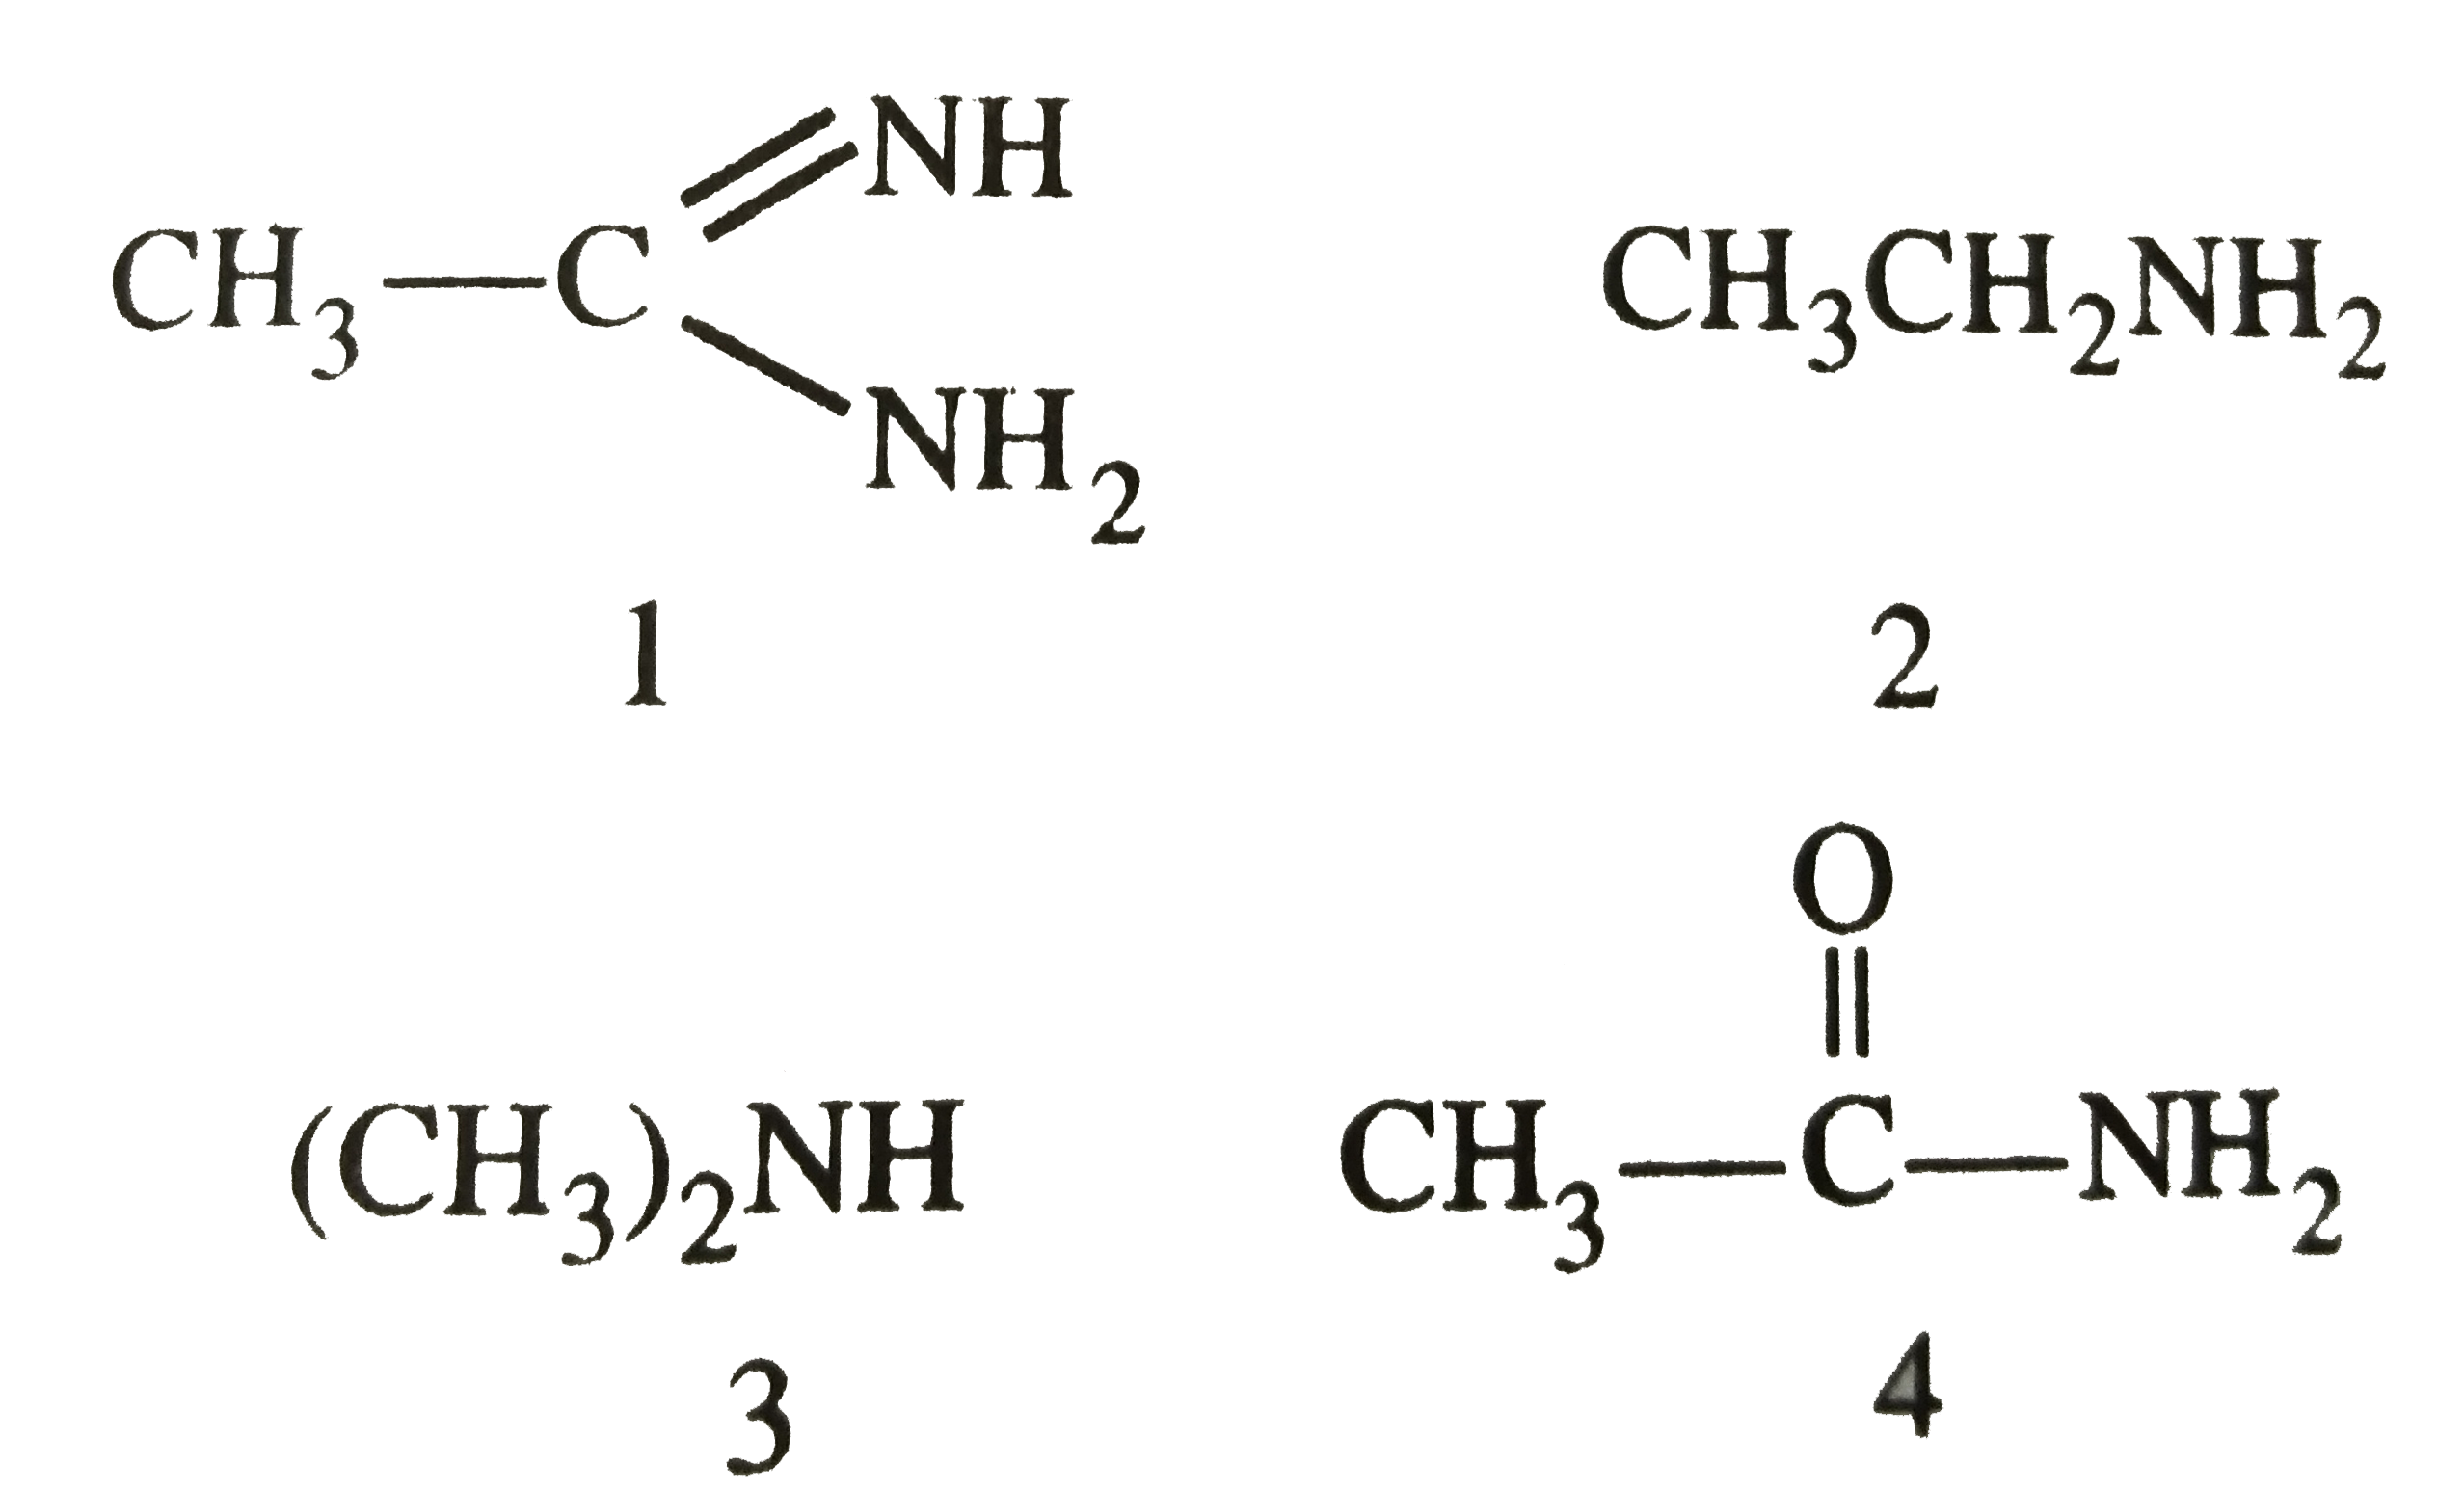 The correct order of basicities of the following compounds is